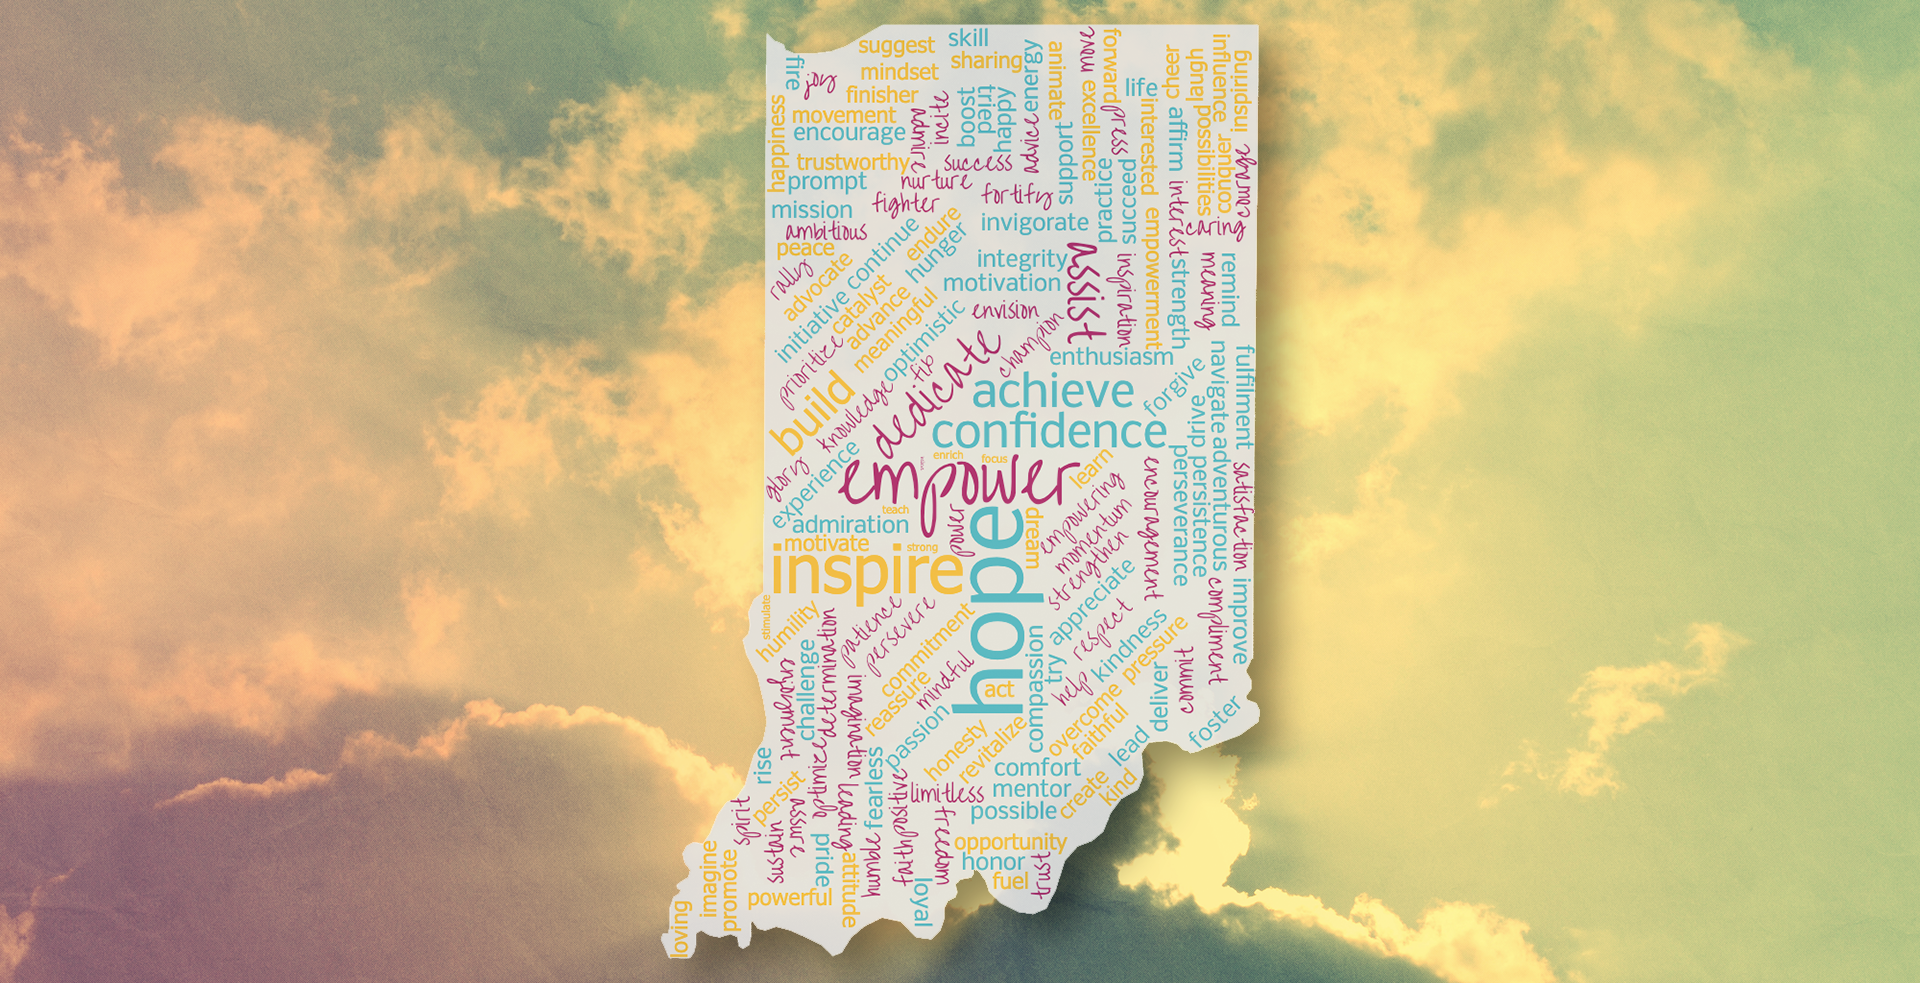 Recovery orgnization - Mental Health America of Indiana